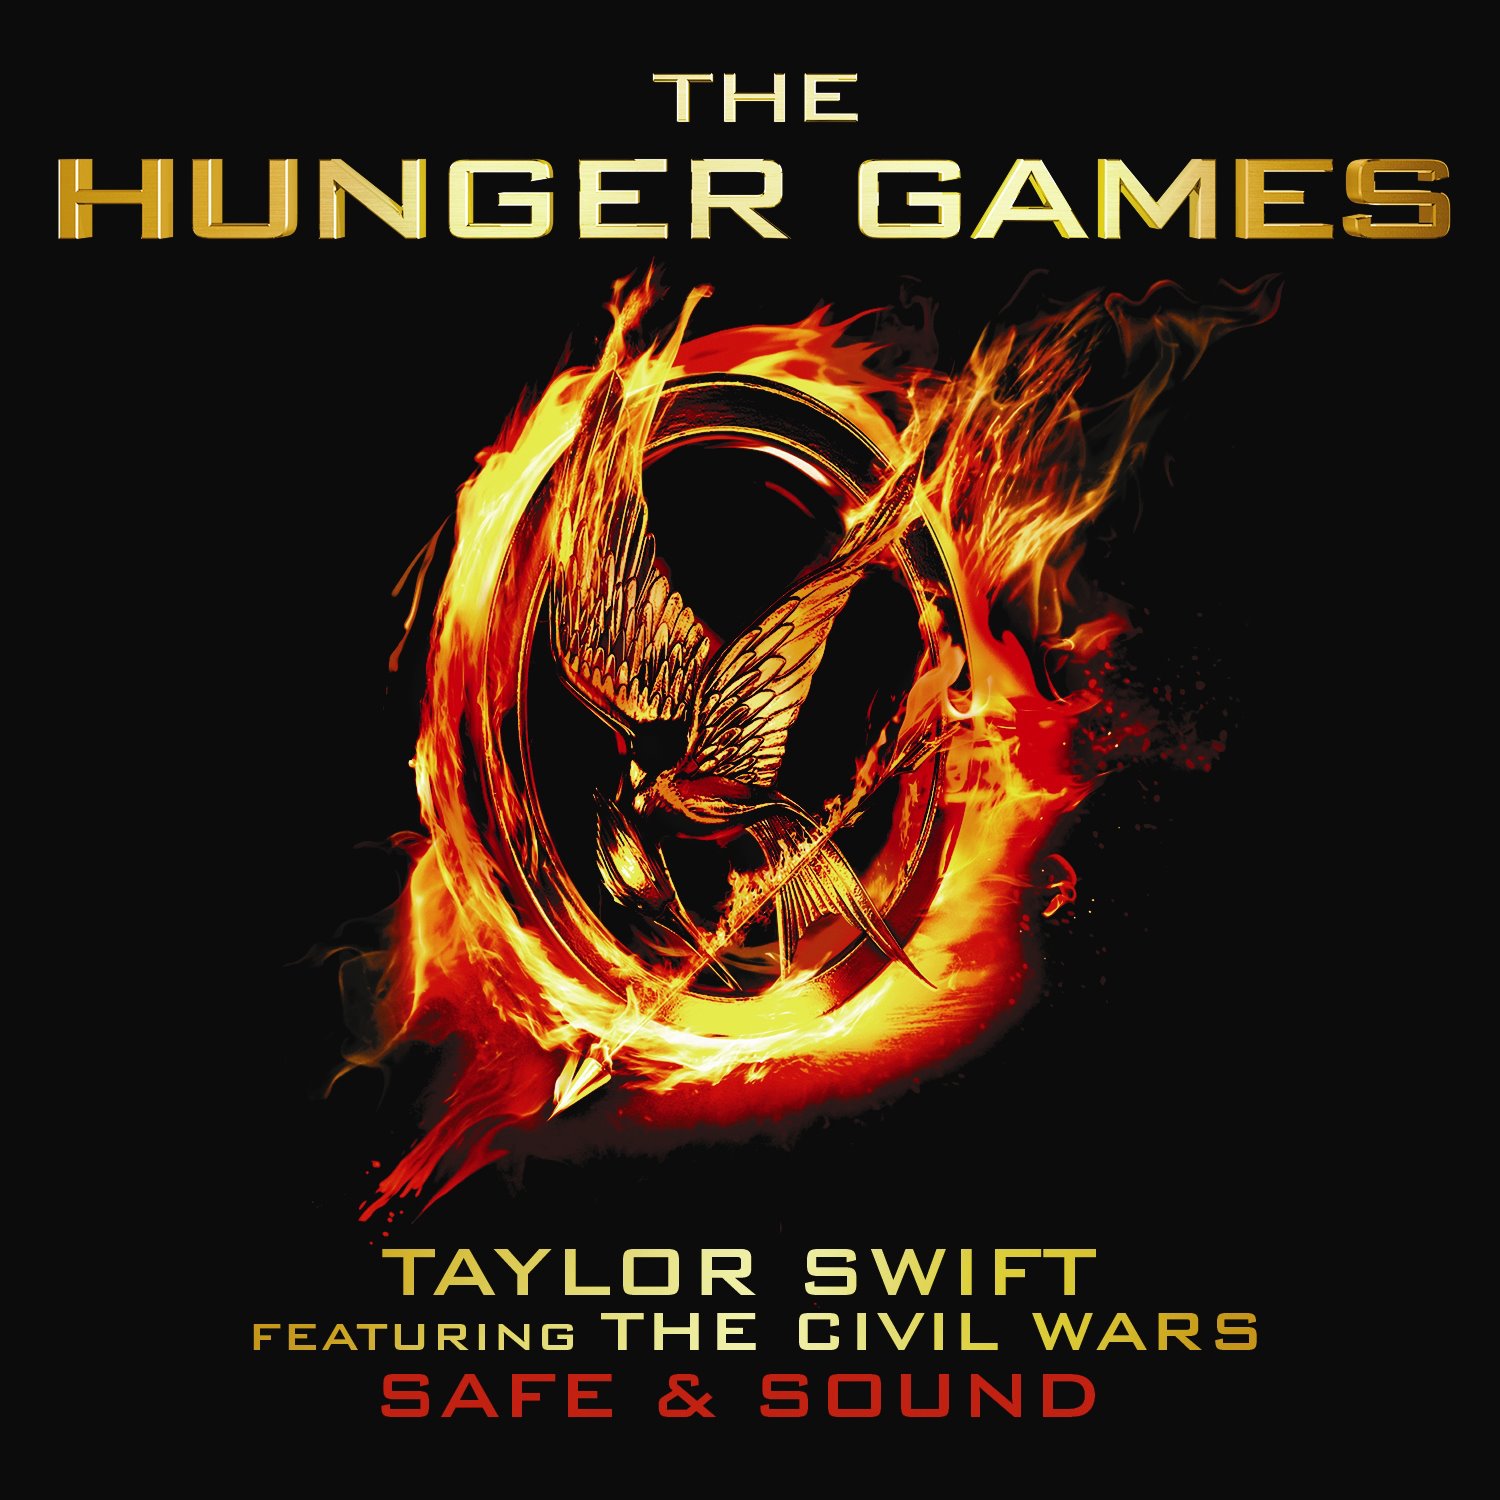 Various, The Hunger Games (Choral Highlights) (arr. Roger Emerson), SAB